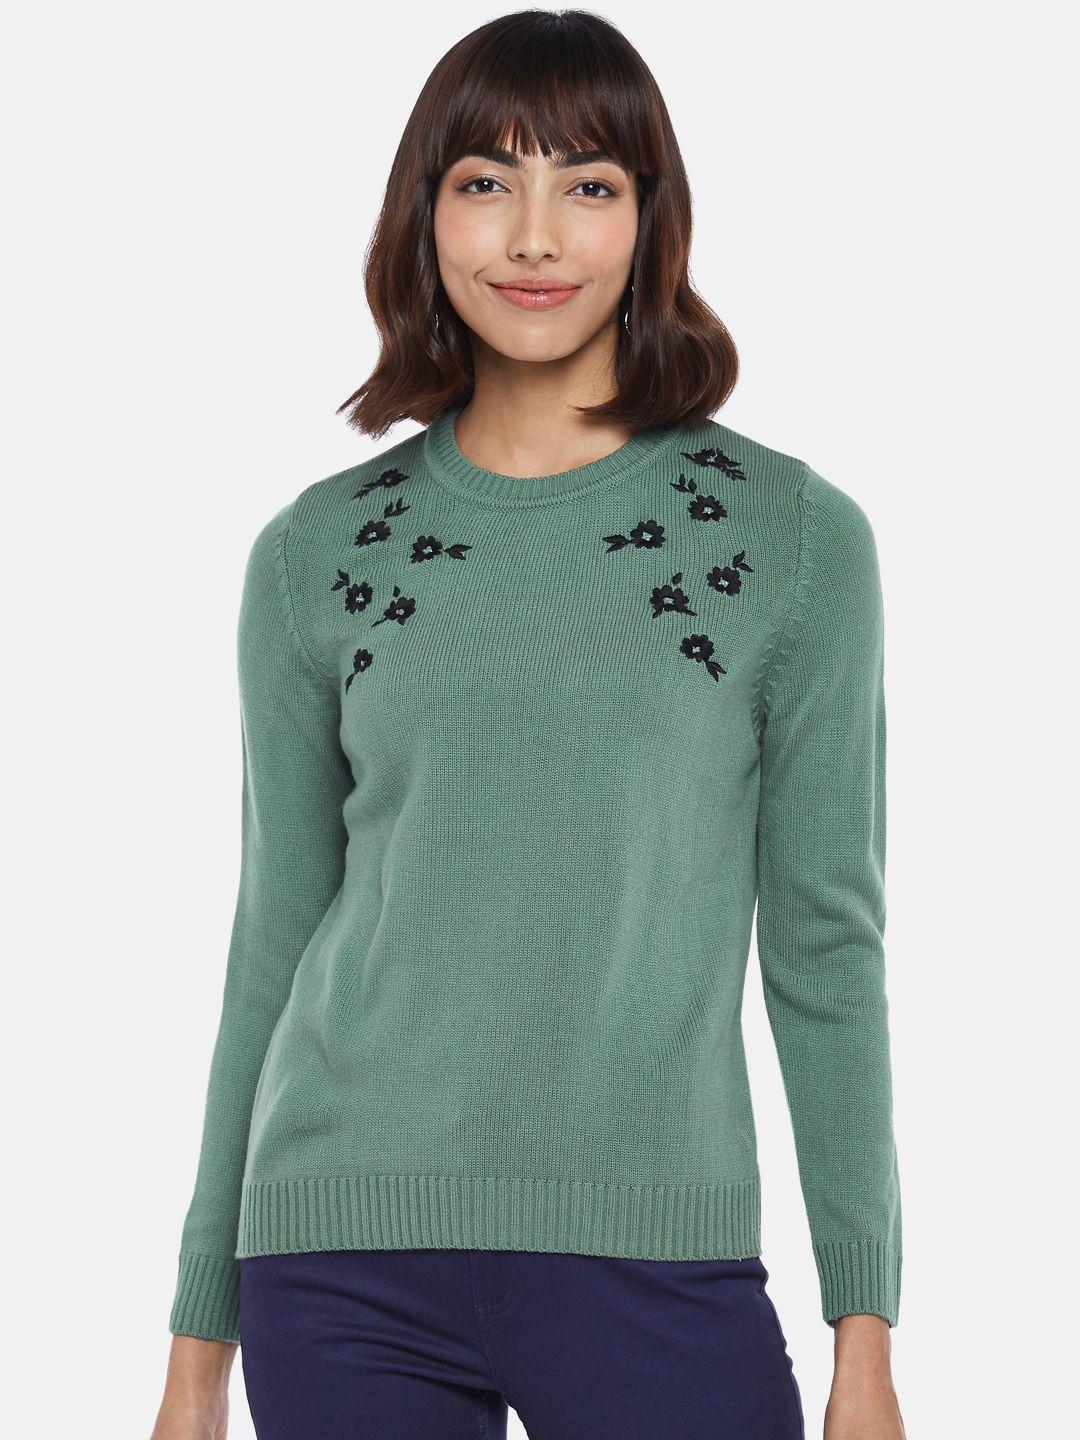 honey by pantaloons women green & black floral pure acrylic pullover